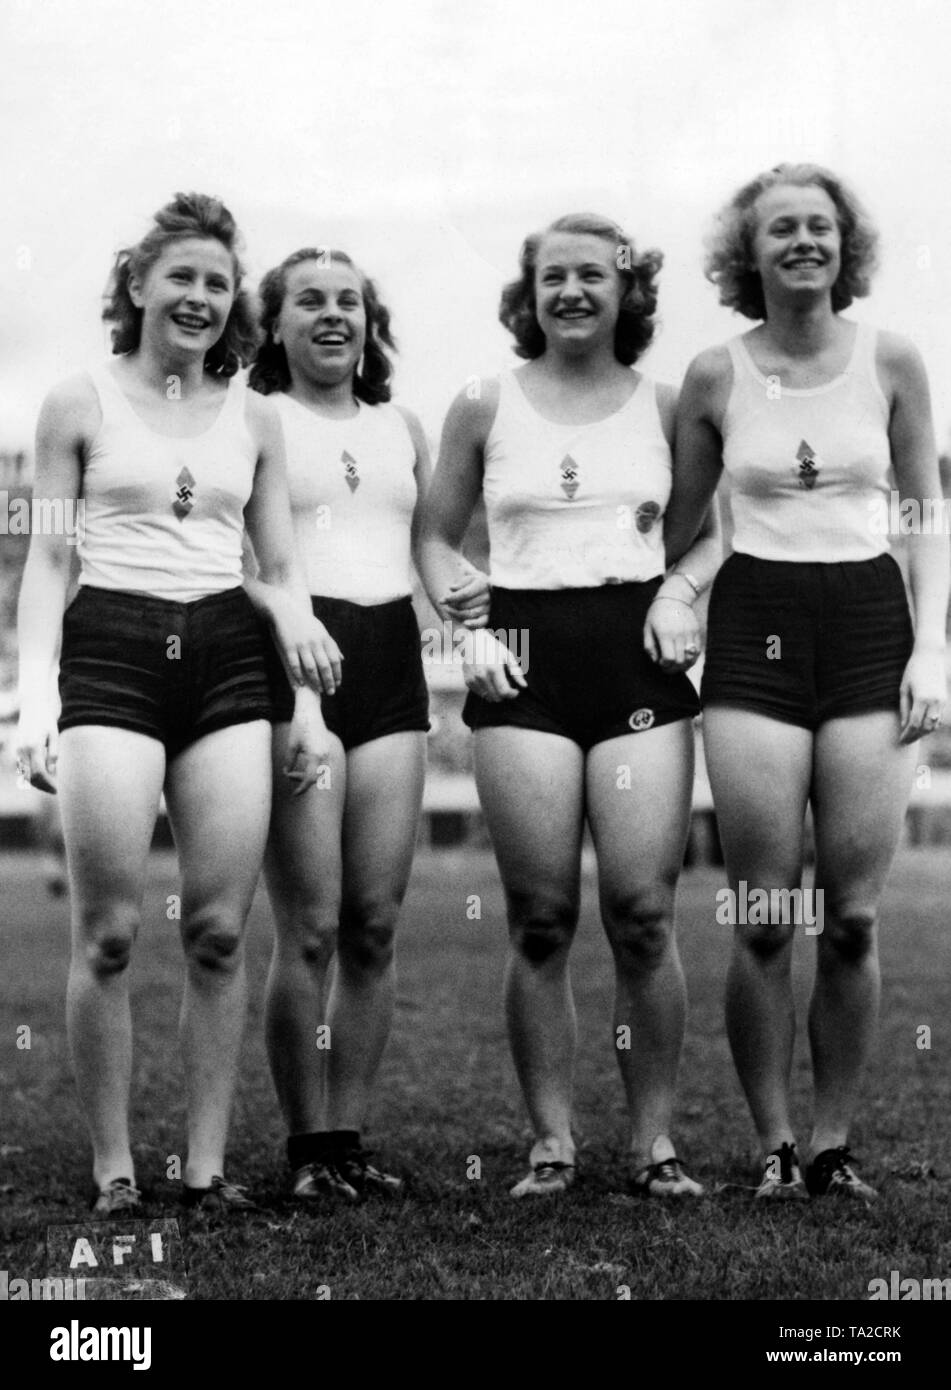 The victorious Hilde Ranke, Lene Muhlen, Annelise Engelhard and Helga Hulin (photo) won the competition between the Italian GIL (Gioventu Italiana del Littorio) and the German Hitler Youth. Stock Photo